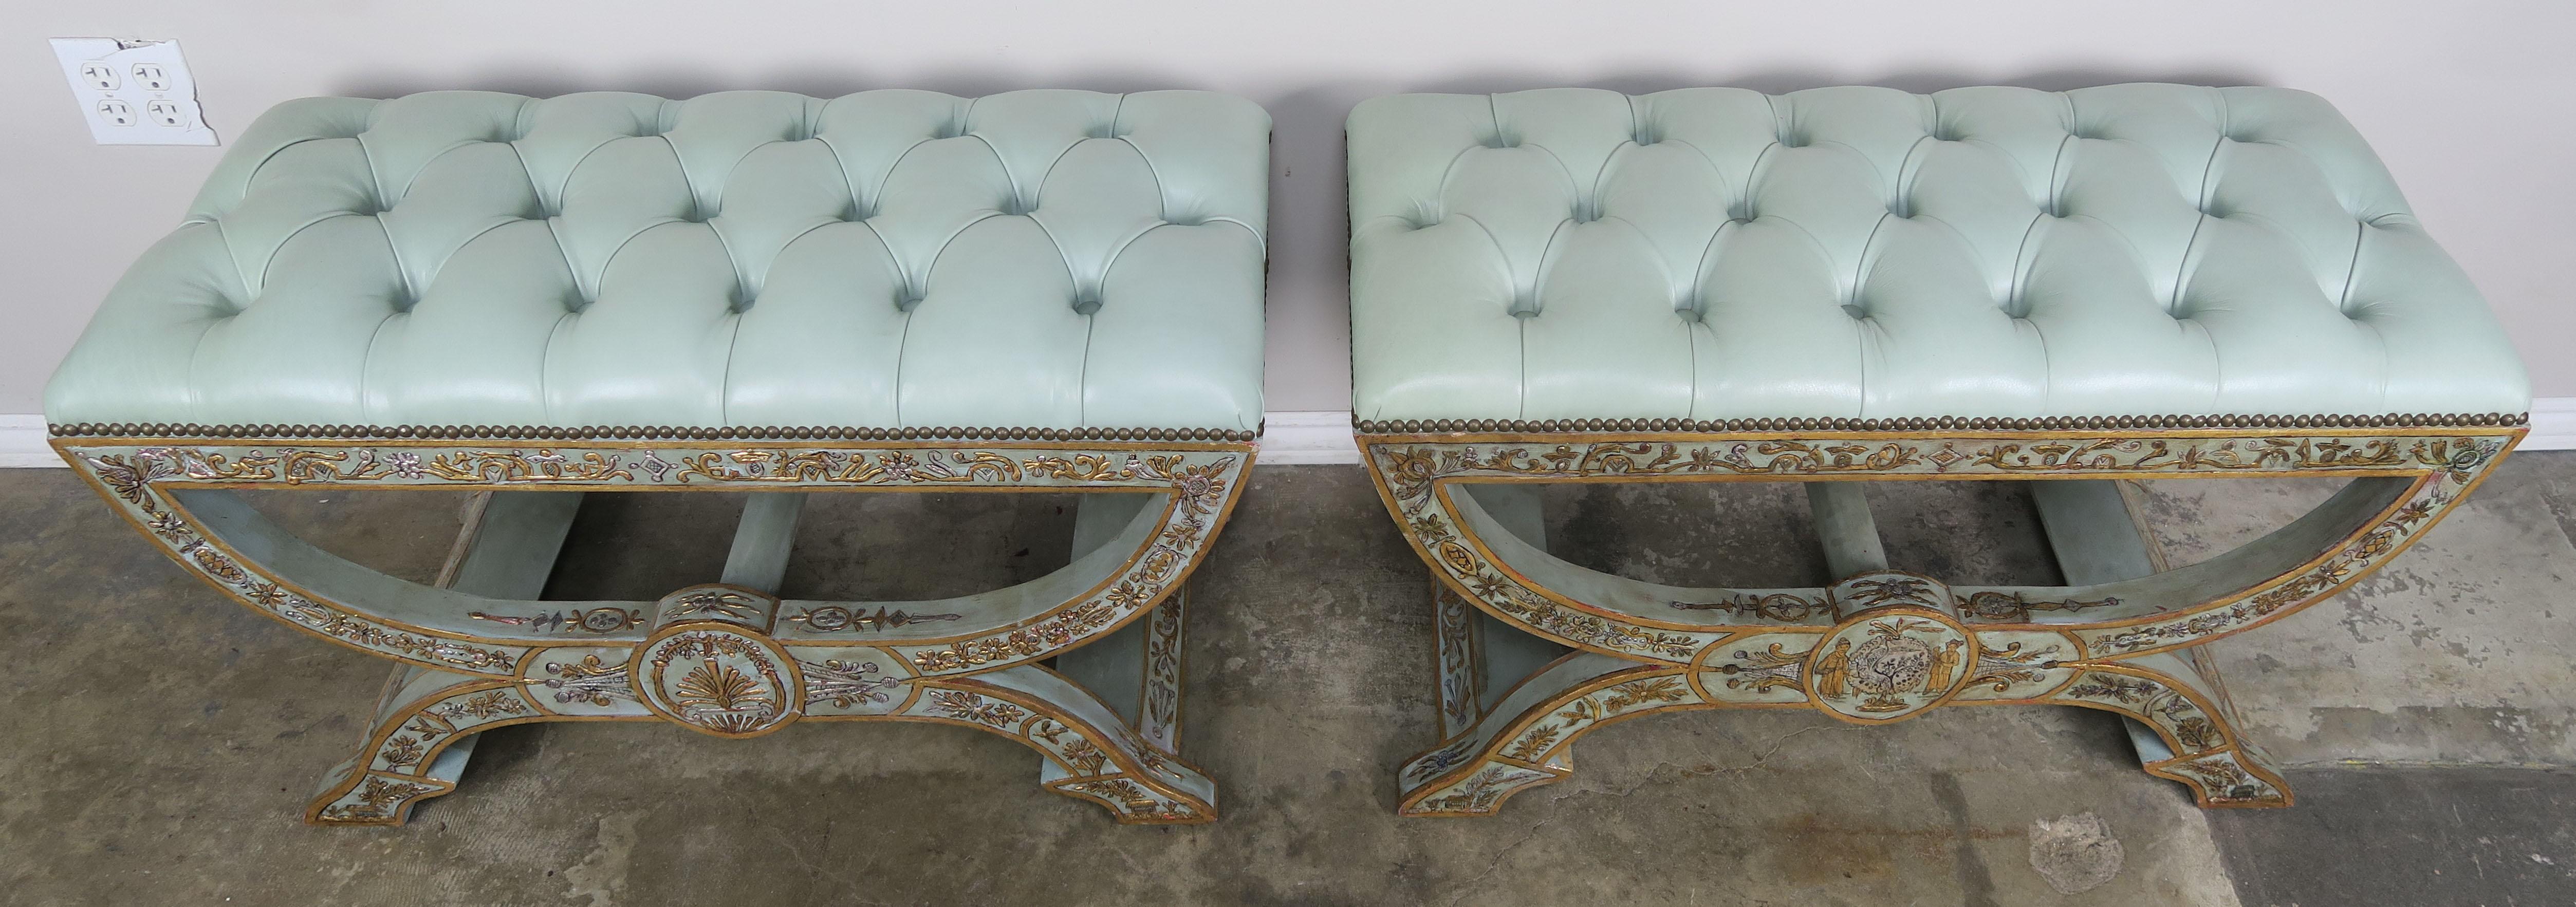 Hand Chinoiserie Painted Benches with Soft Blue Leather Upholstery, Pair 6